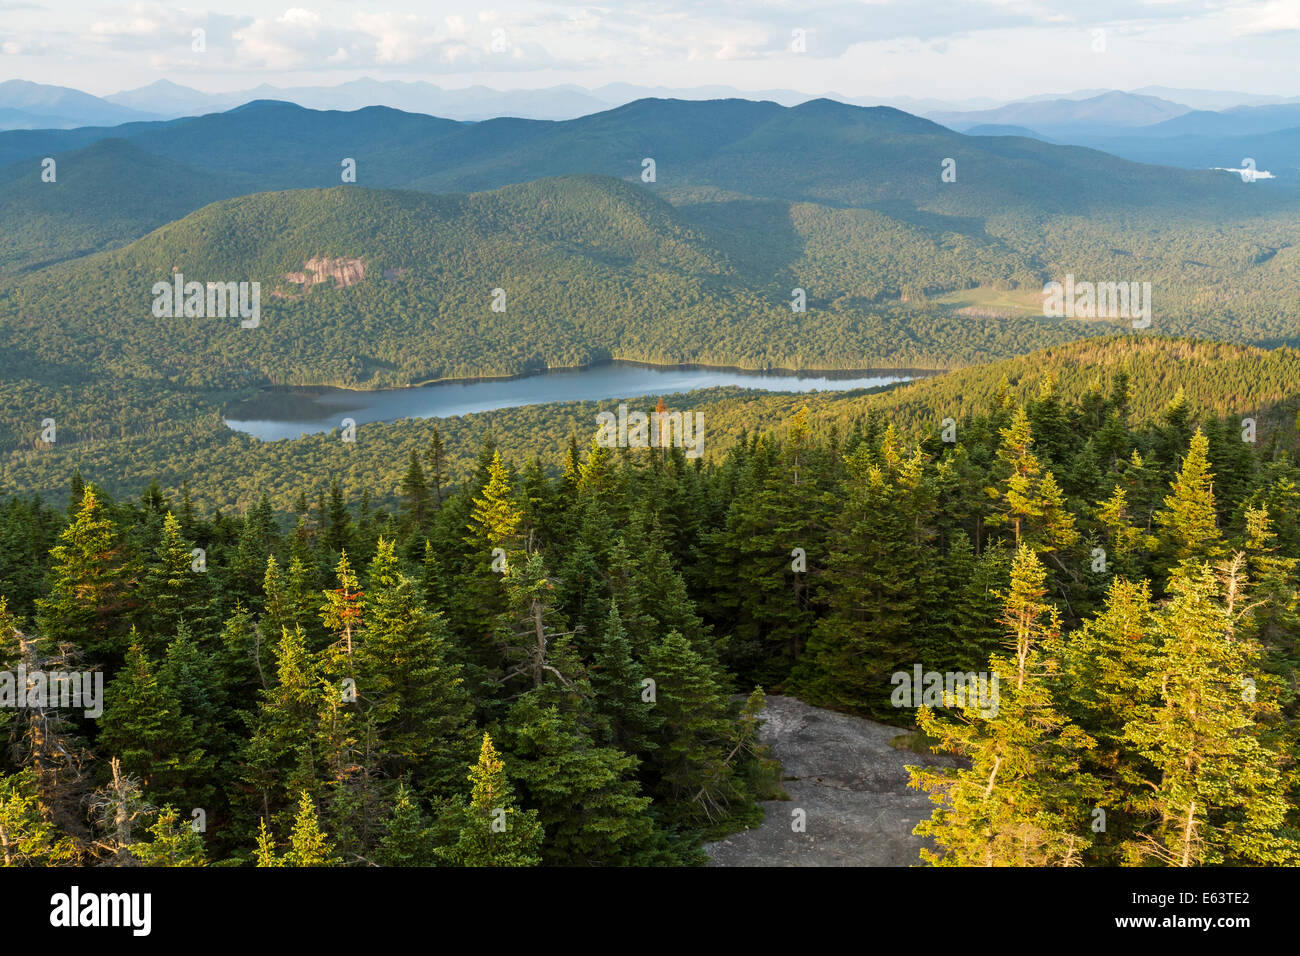 Tirrell Pond and the cliffs of Tirrell Mountain seen from the Blue Mountain fire tower in the Adirondacks Mountains of New York Stock Photo